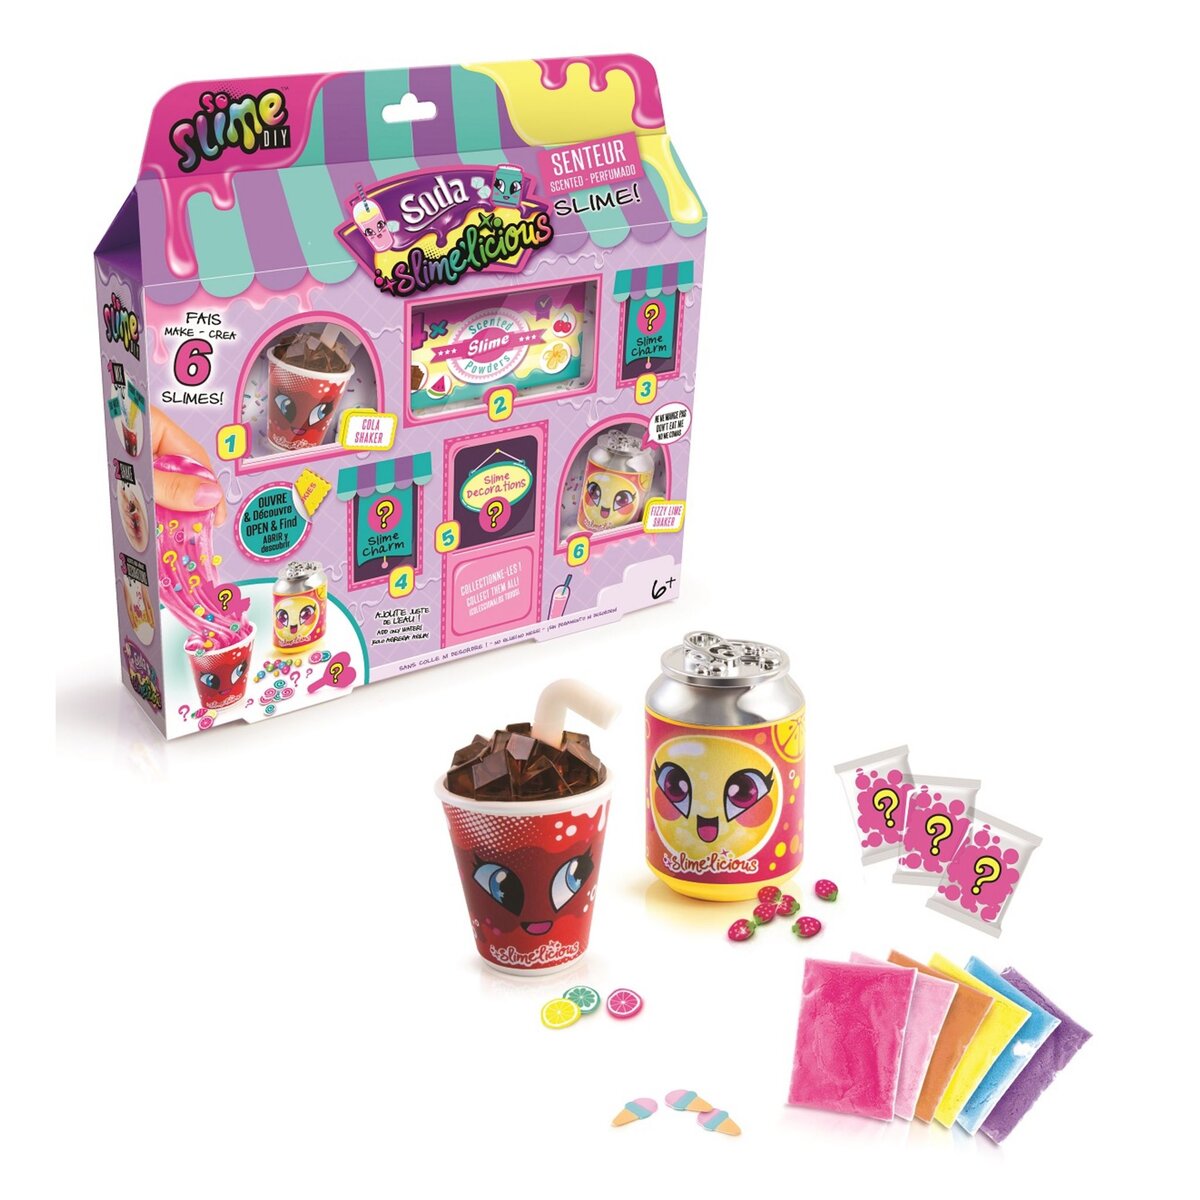 CANAL TOYS Slimelicious - Coffee shop